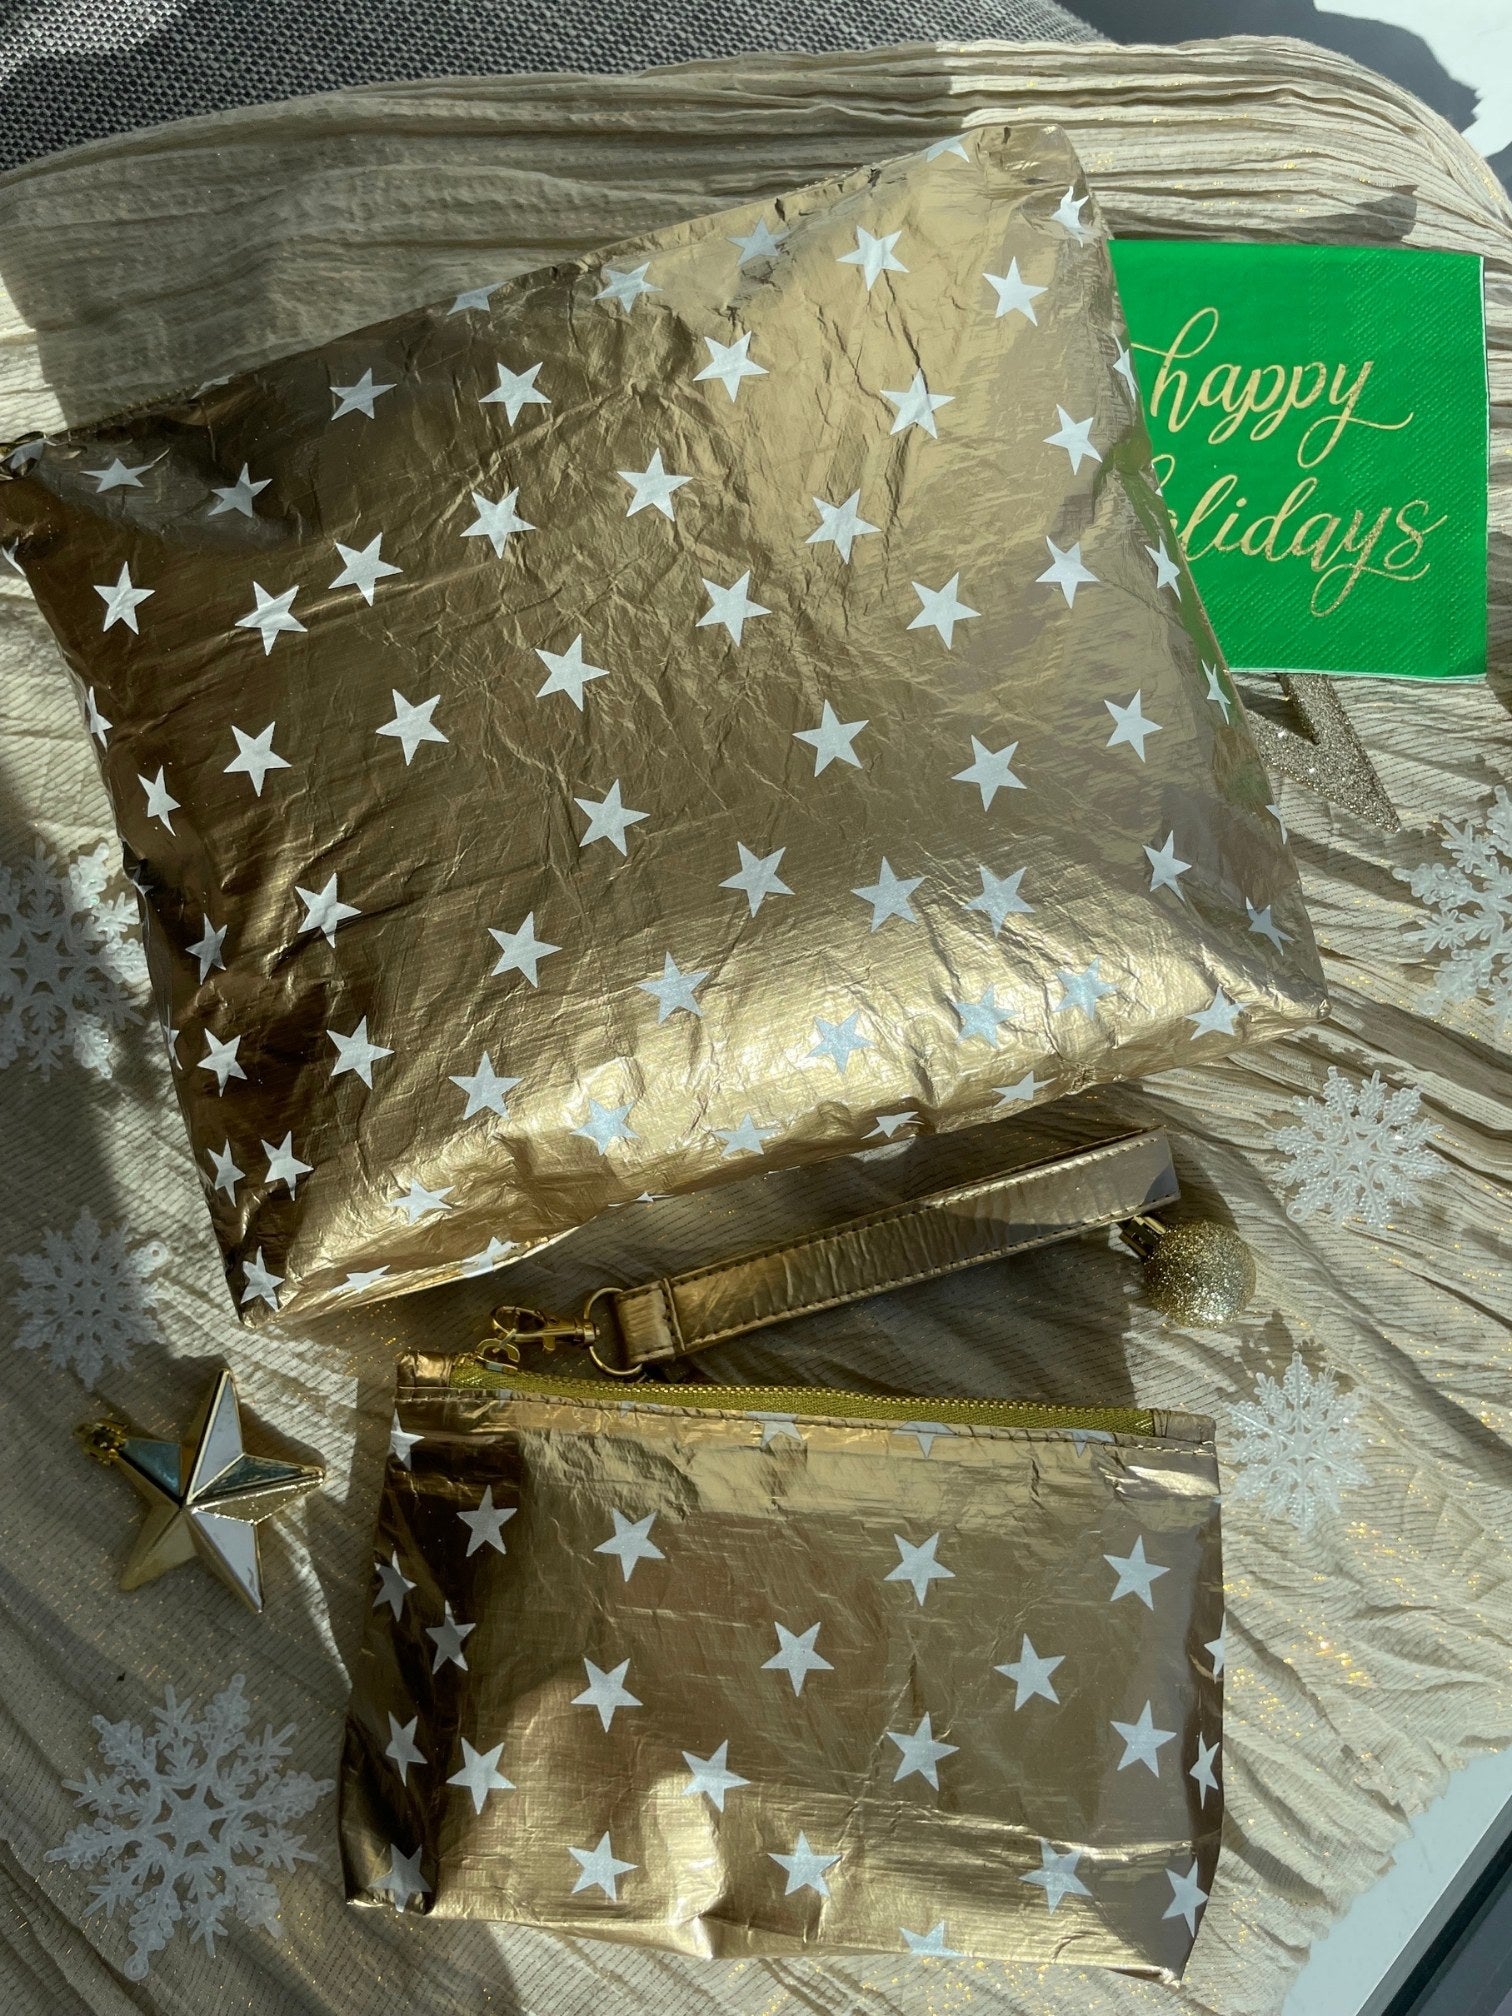 Zipper pouch in gold with white stars, great for holiday gifts